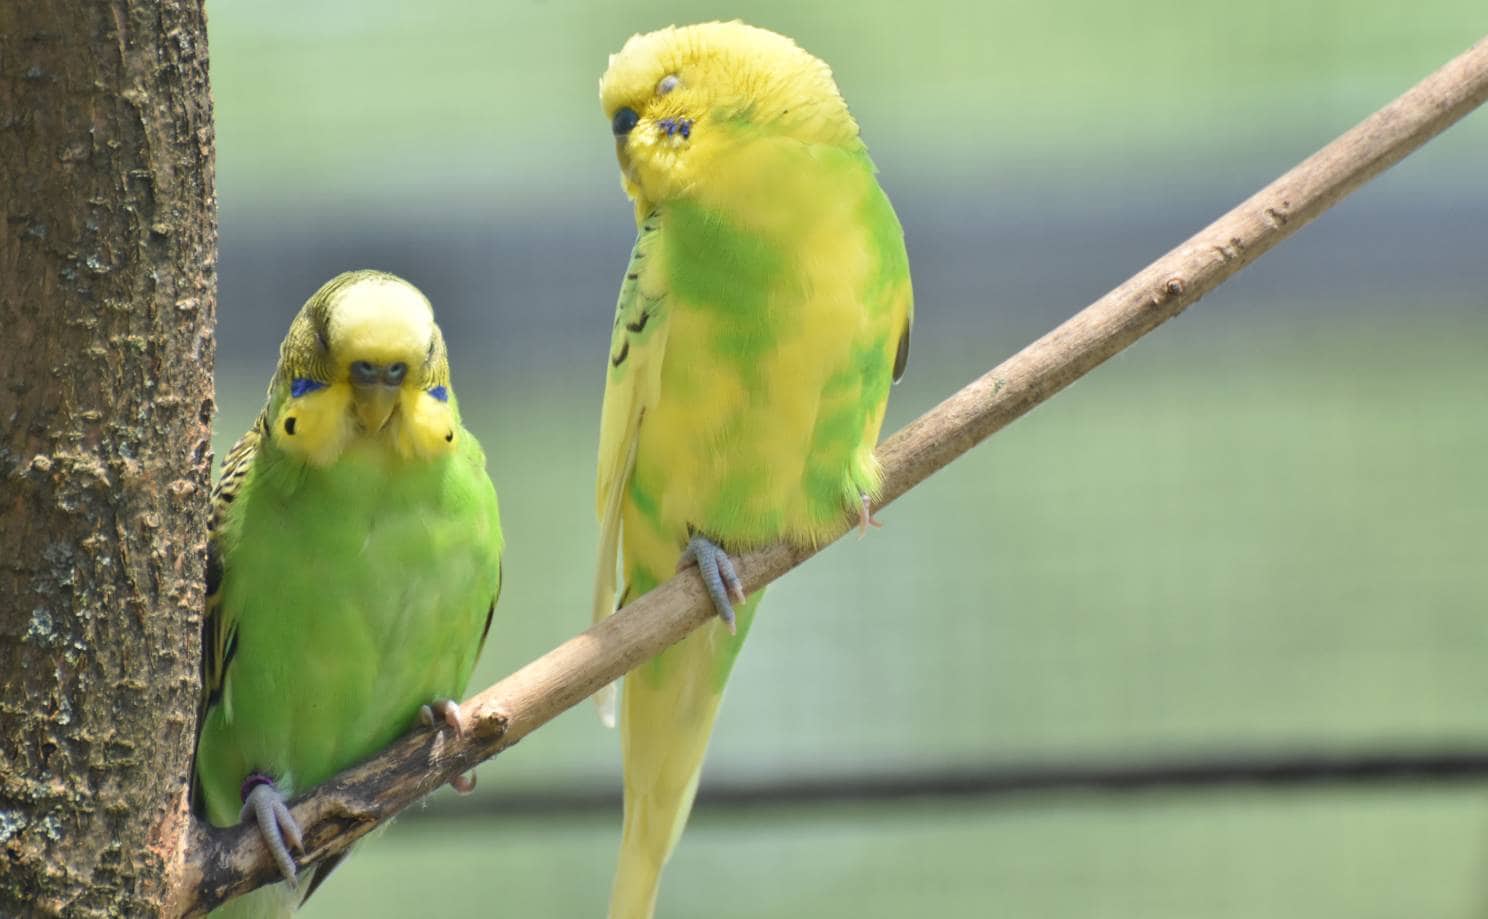 Two Yellow-Faced Parrotlet on the branch of the tree_DejaVuDesigns_Shutterstock